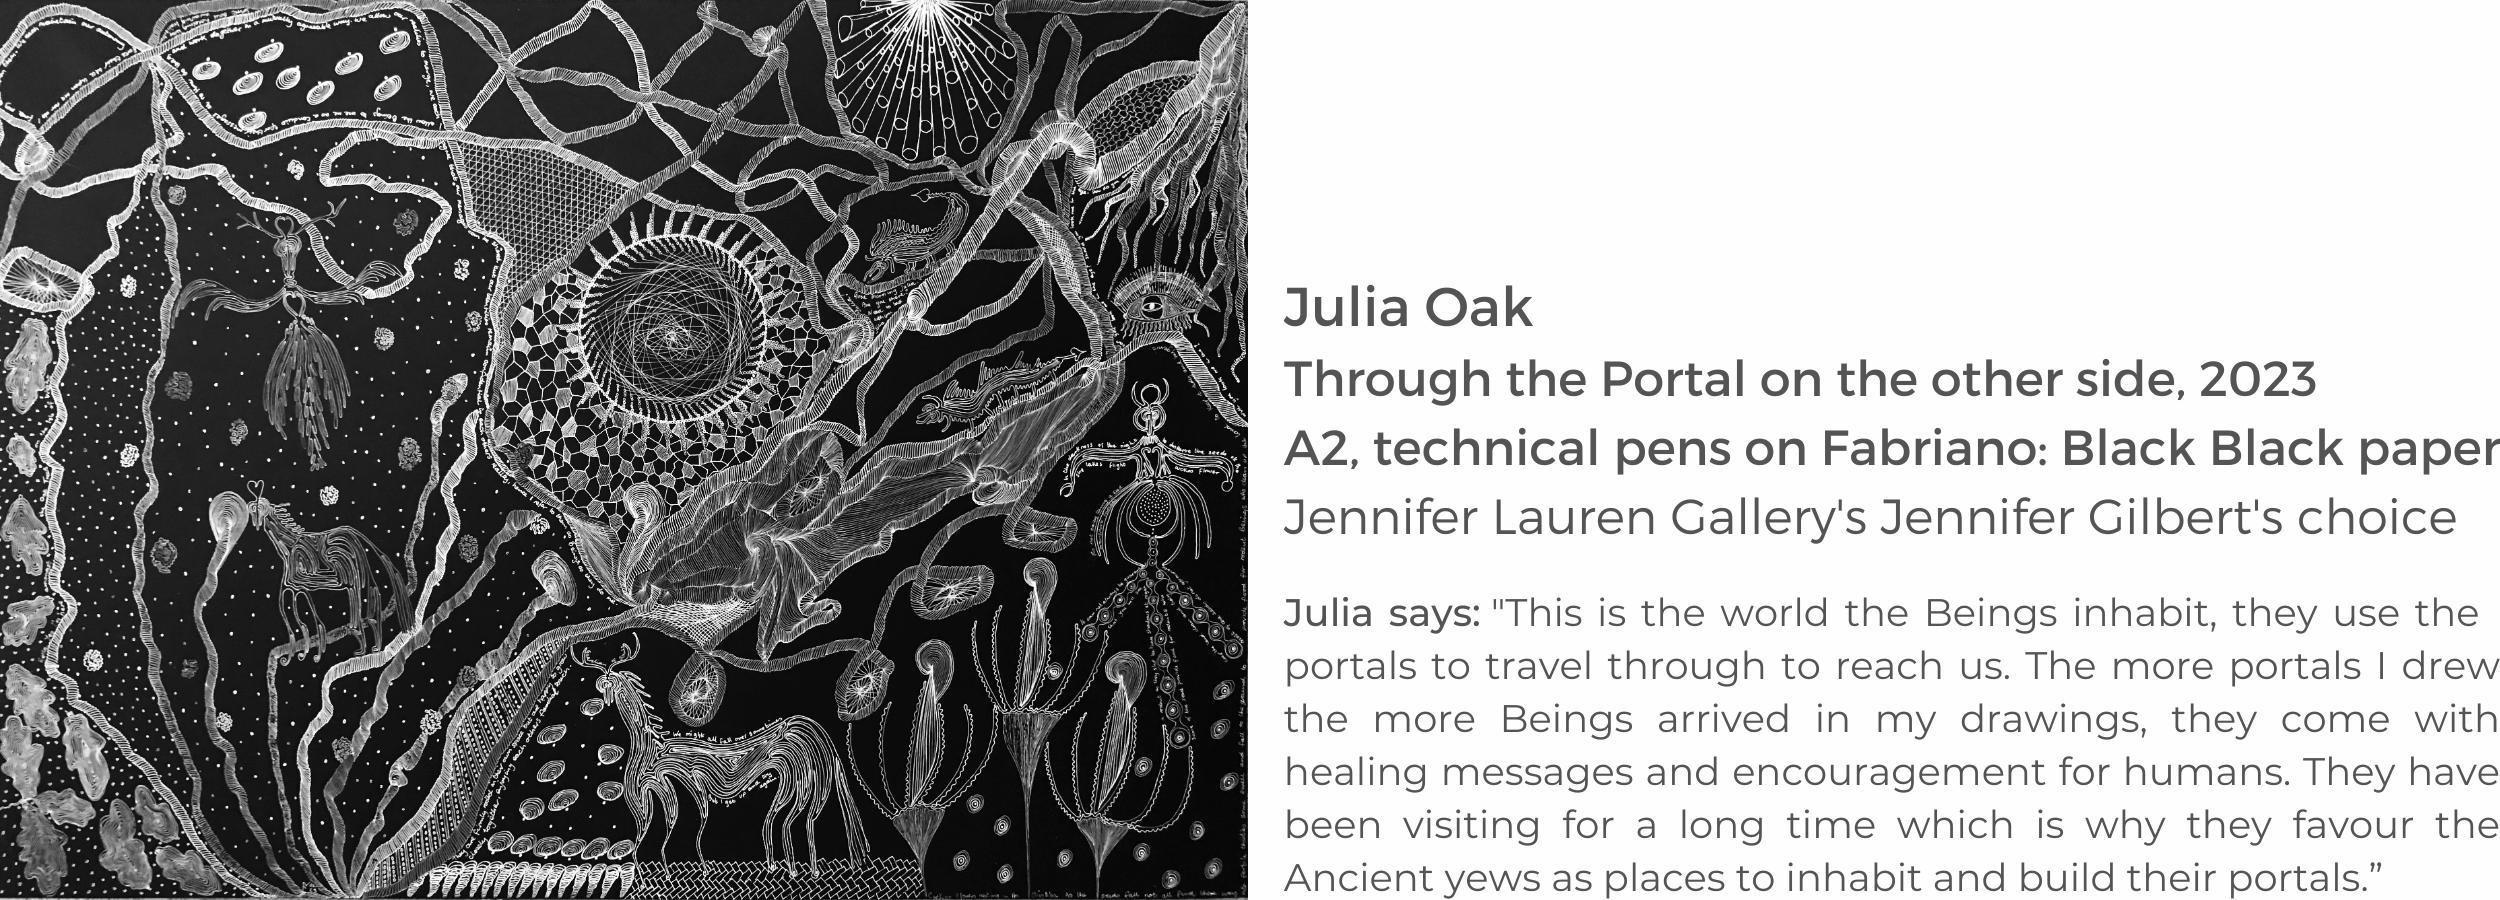 Artist Julia Oak with Through the Portal on the Other Side